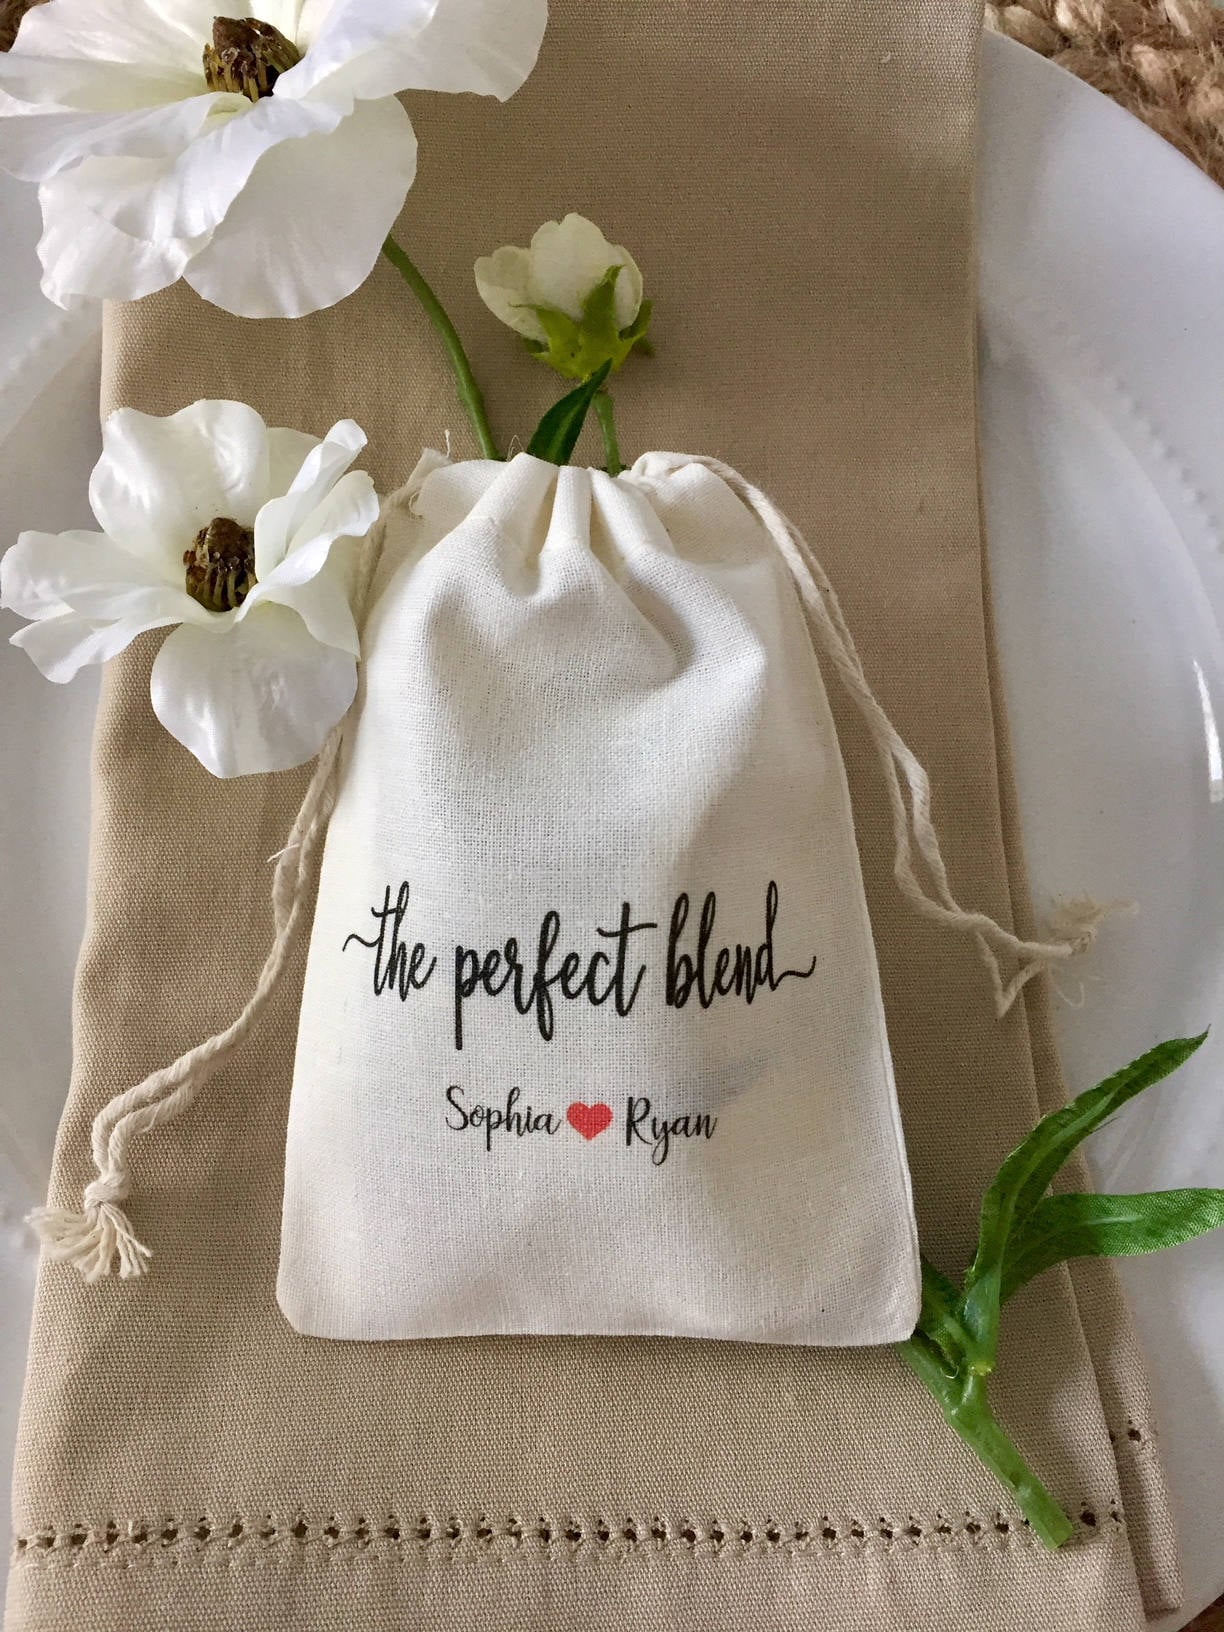 20 Top Wedding Party Favors Ideas Your Guests Want To Have